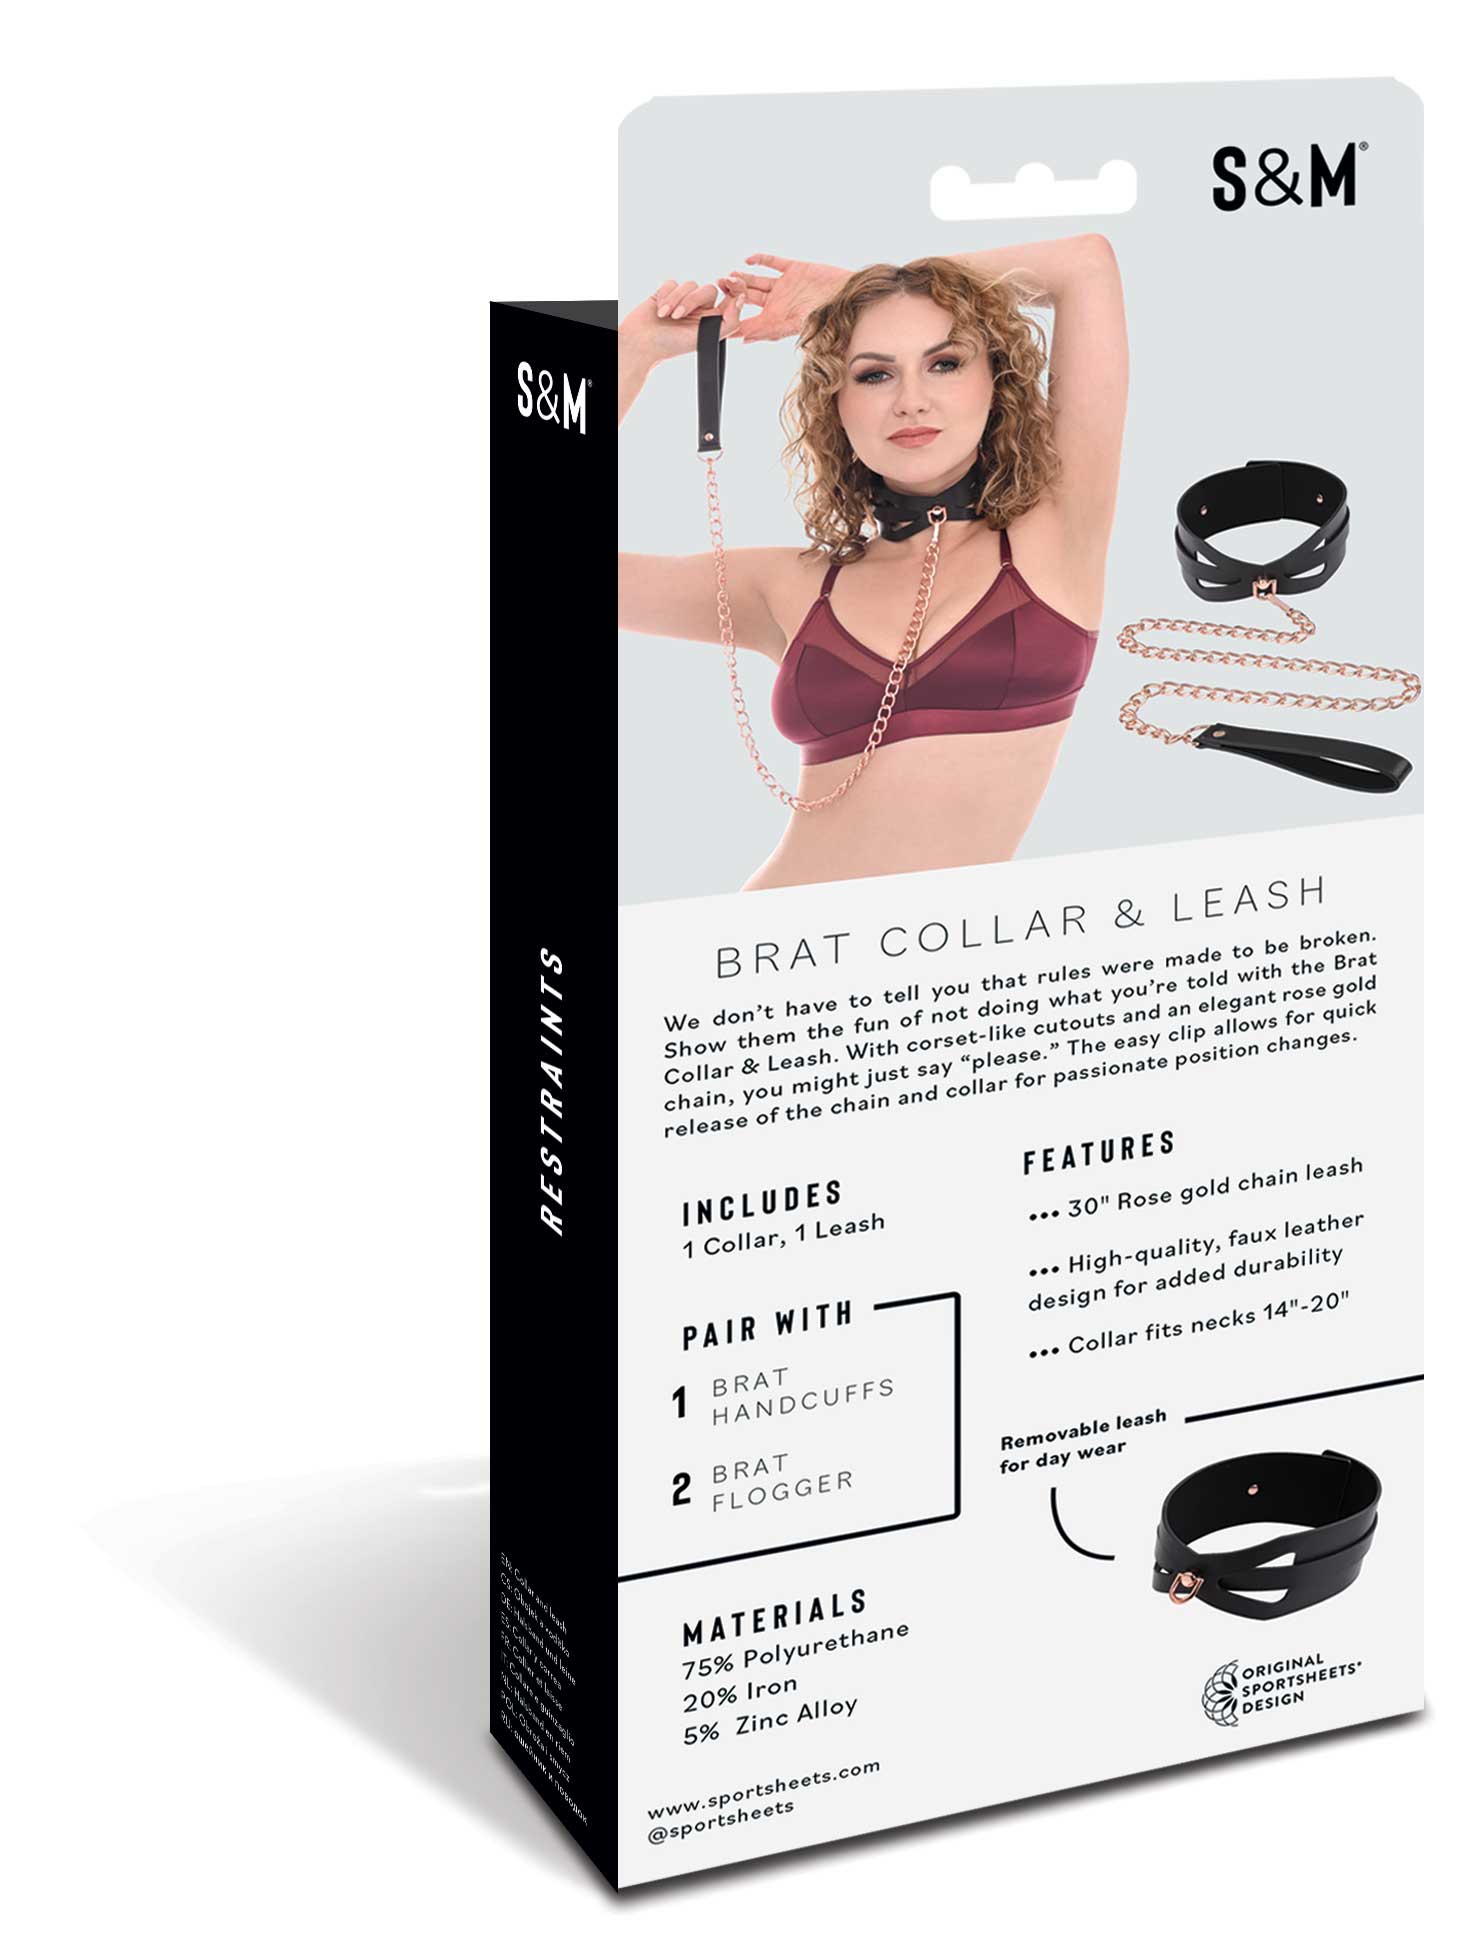 The back of the packaging for the Brat Collar and Leash.